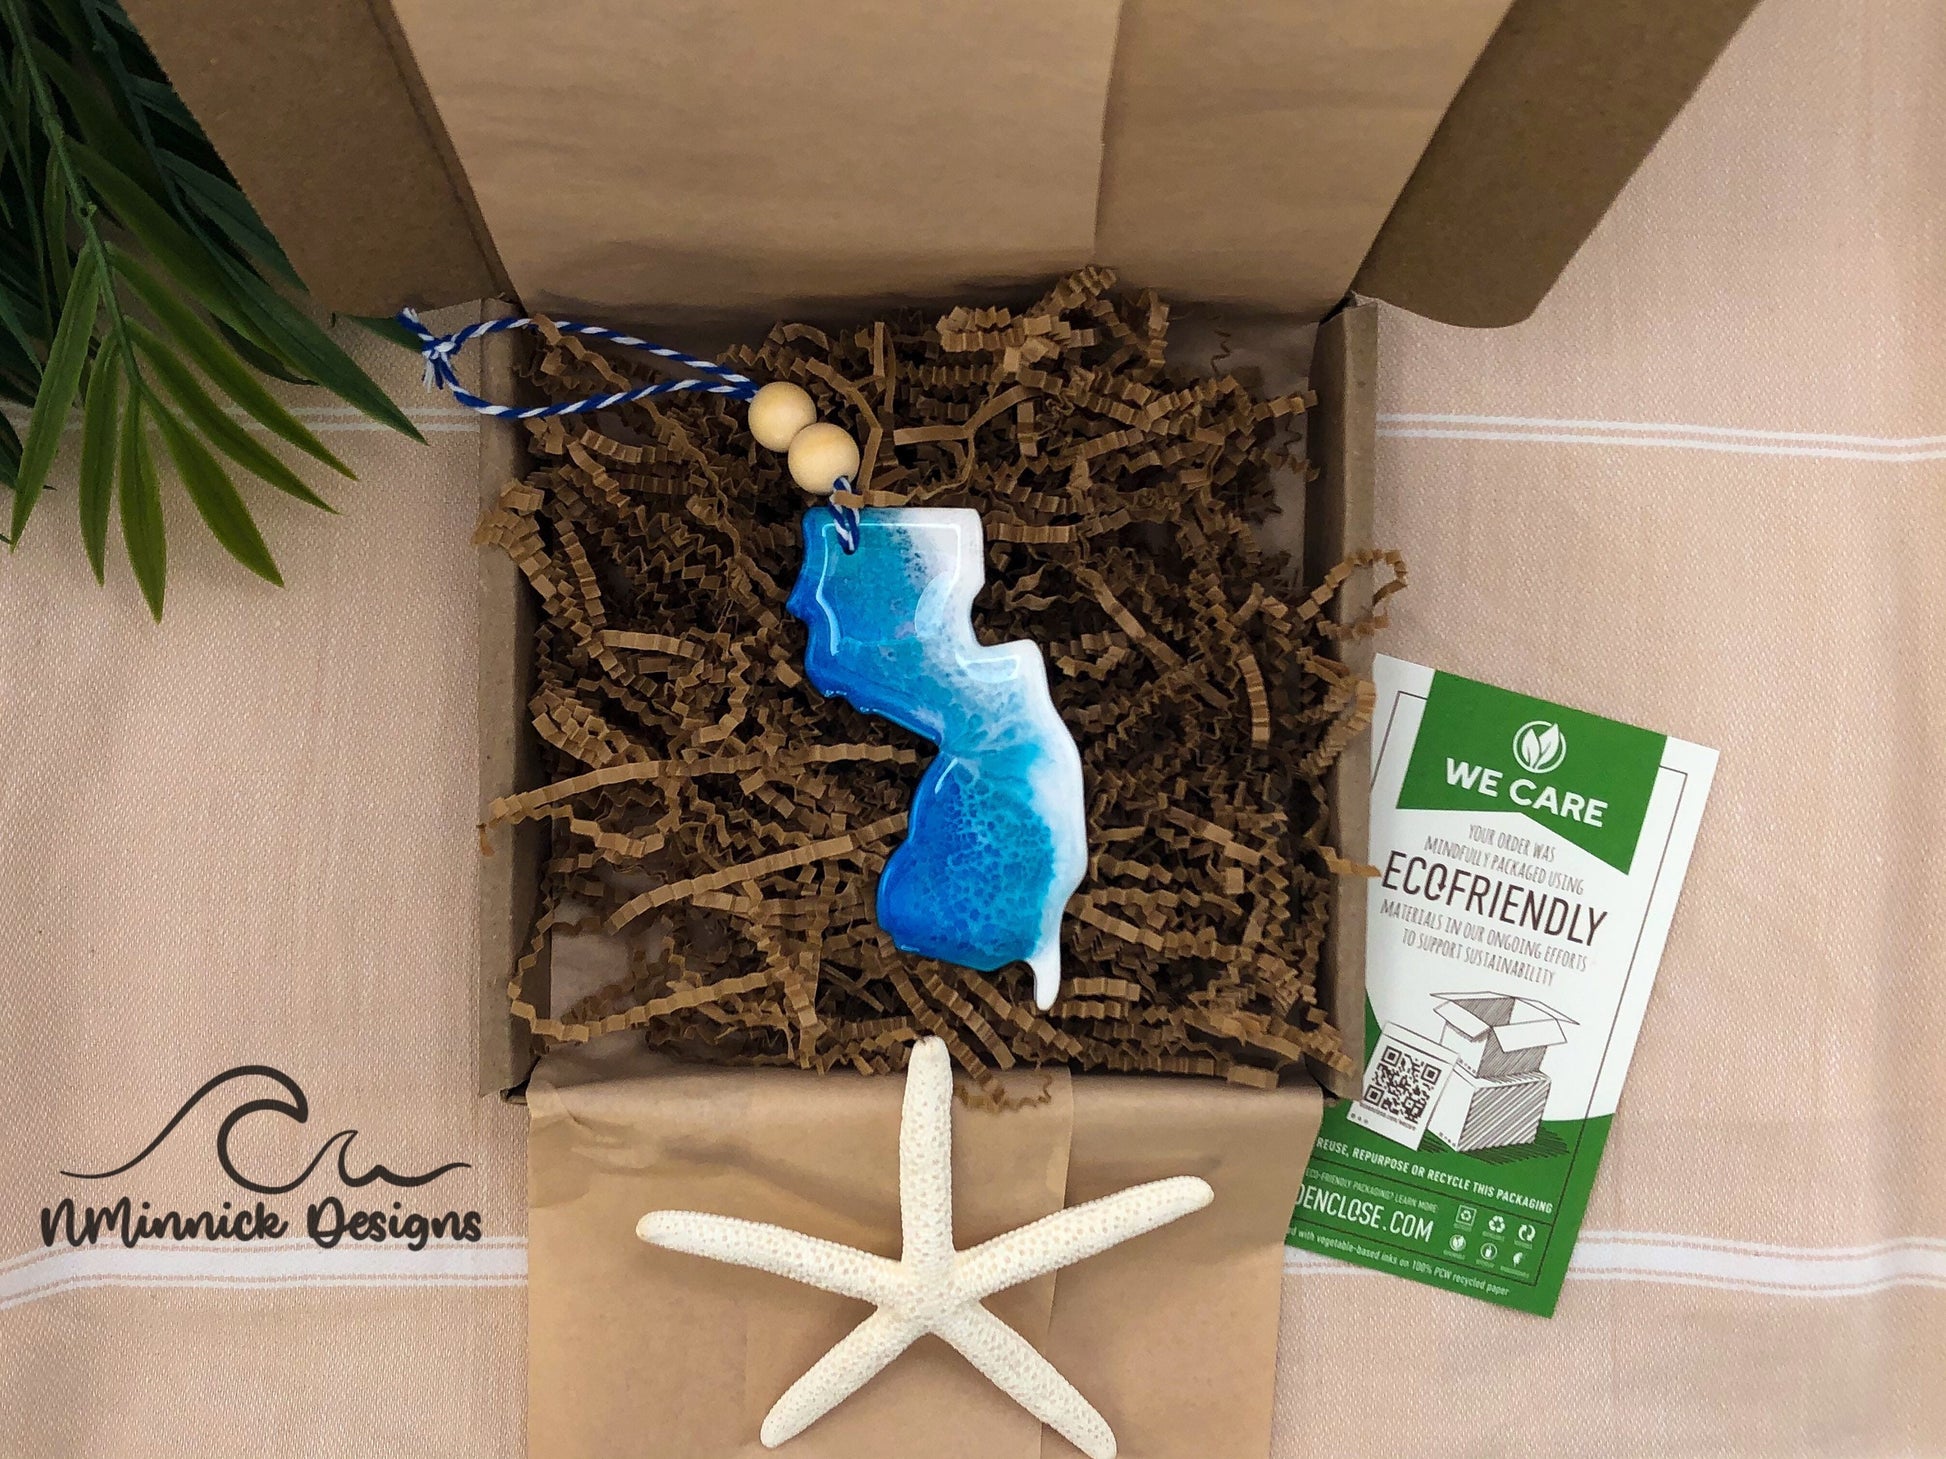 New Jersey Beach Scene ornament packaged in ecofriendly plastic free materials with recyclable box, tissue paper and paper shred.